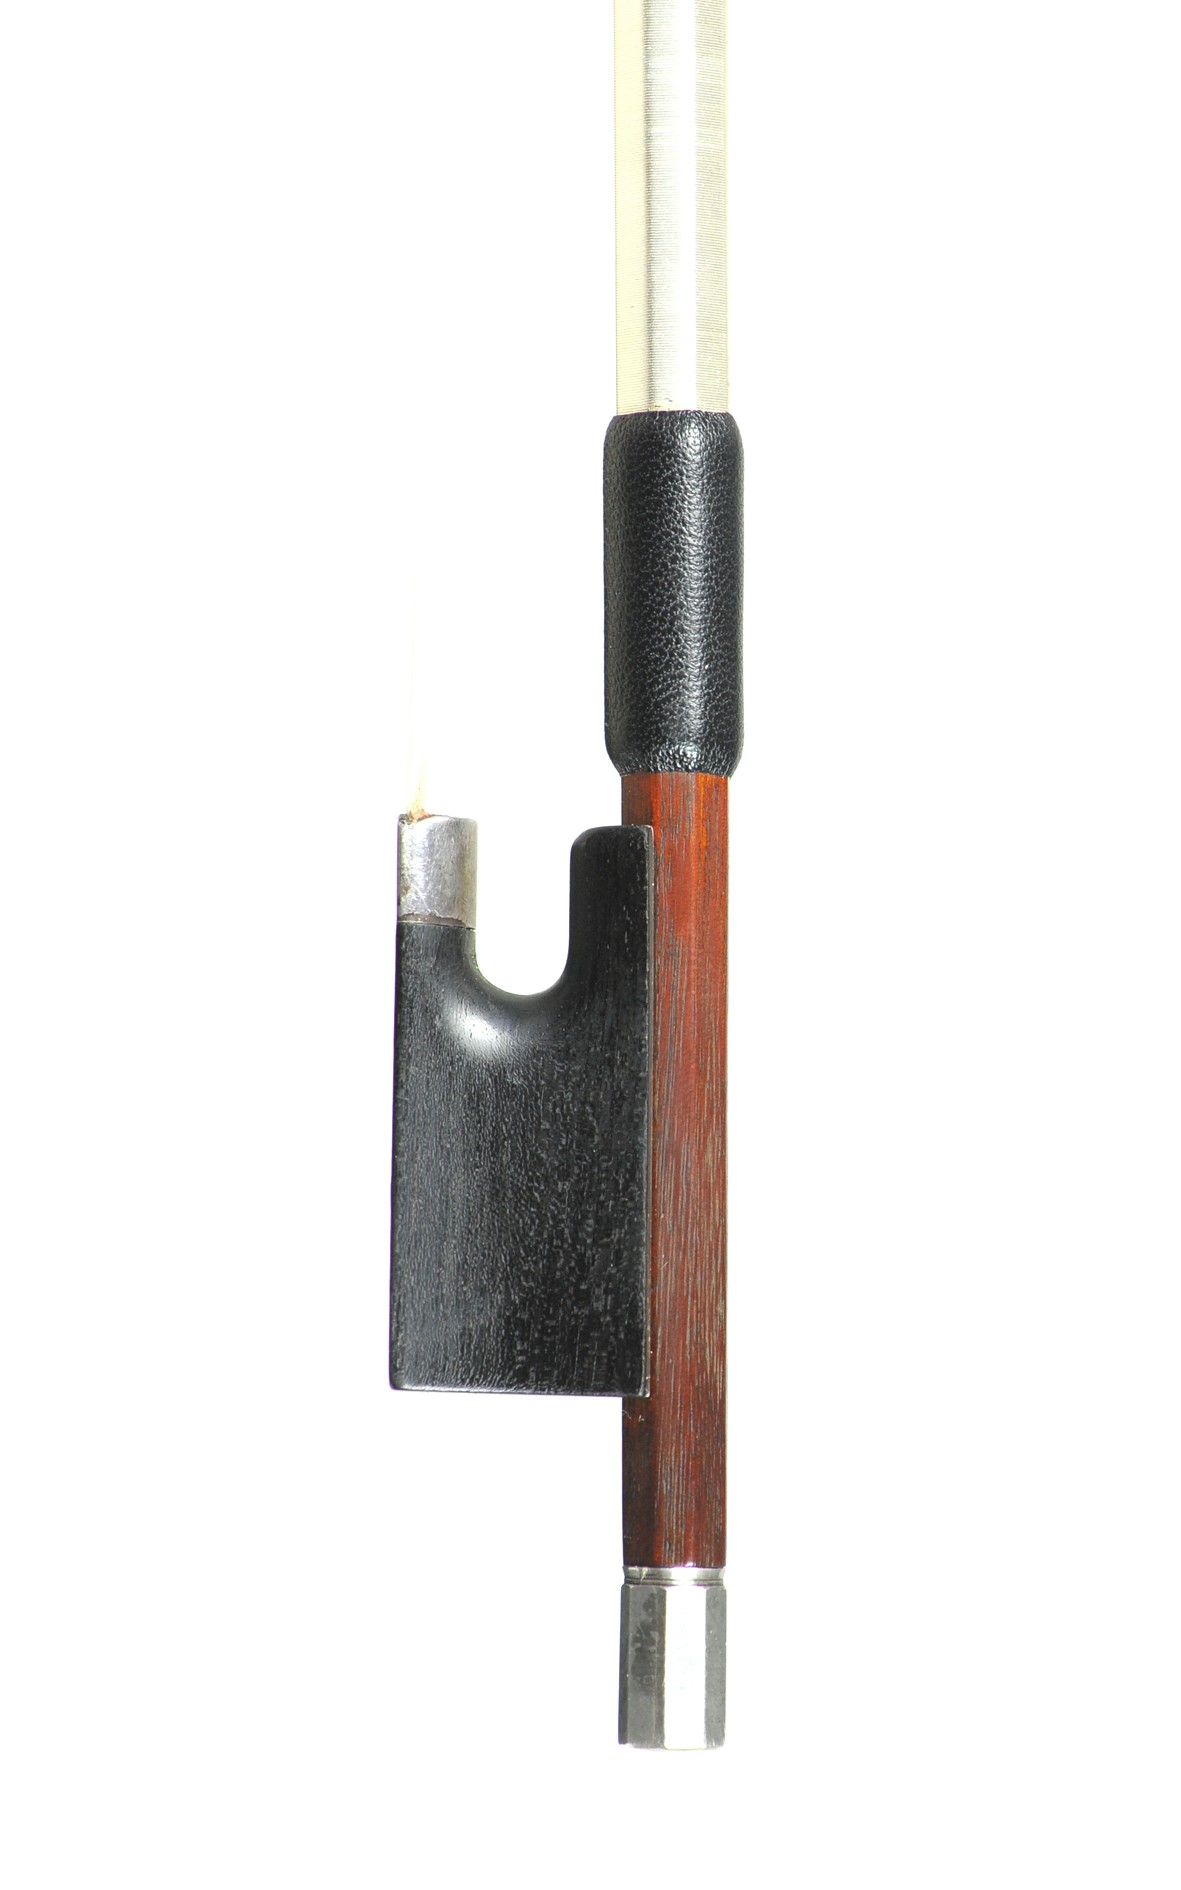 Violin bow from Markneukirchen, Hill model